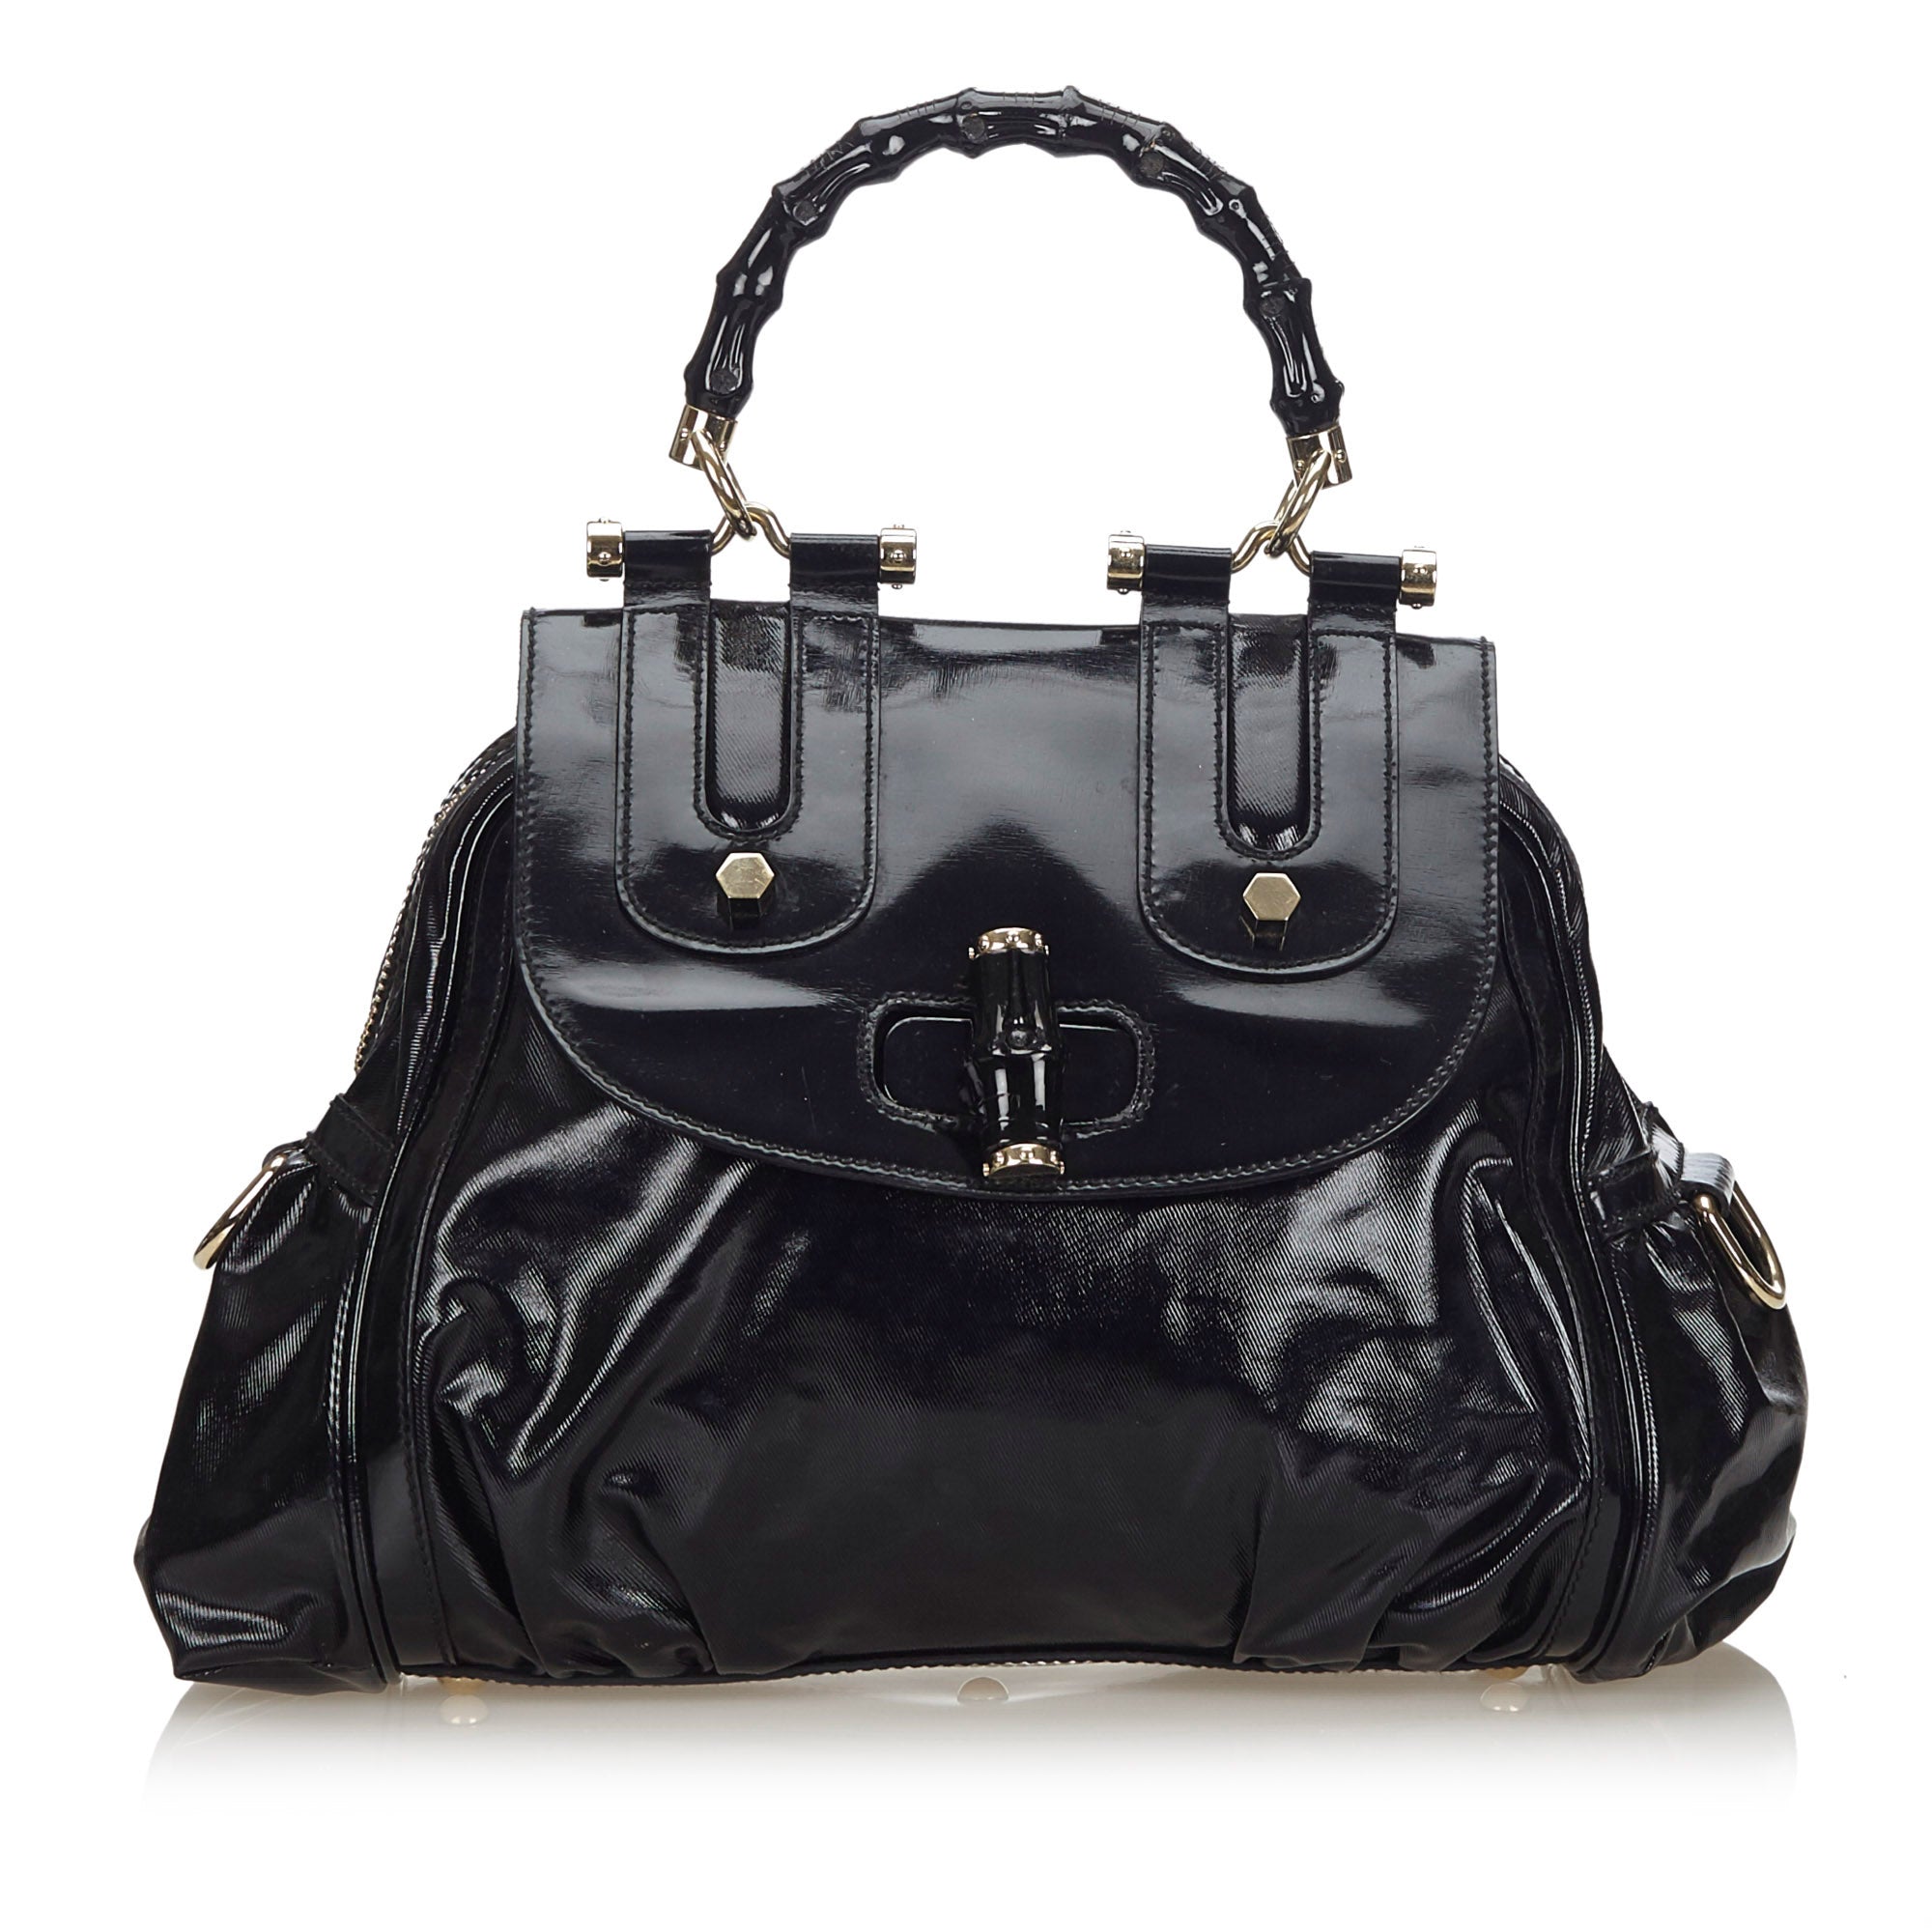 Buy & Consign Authentic Gucci Bamboo Patent Leather Satchel Black at The Plush Posh